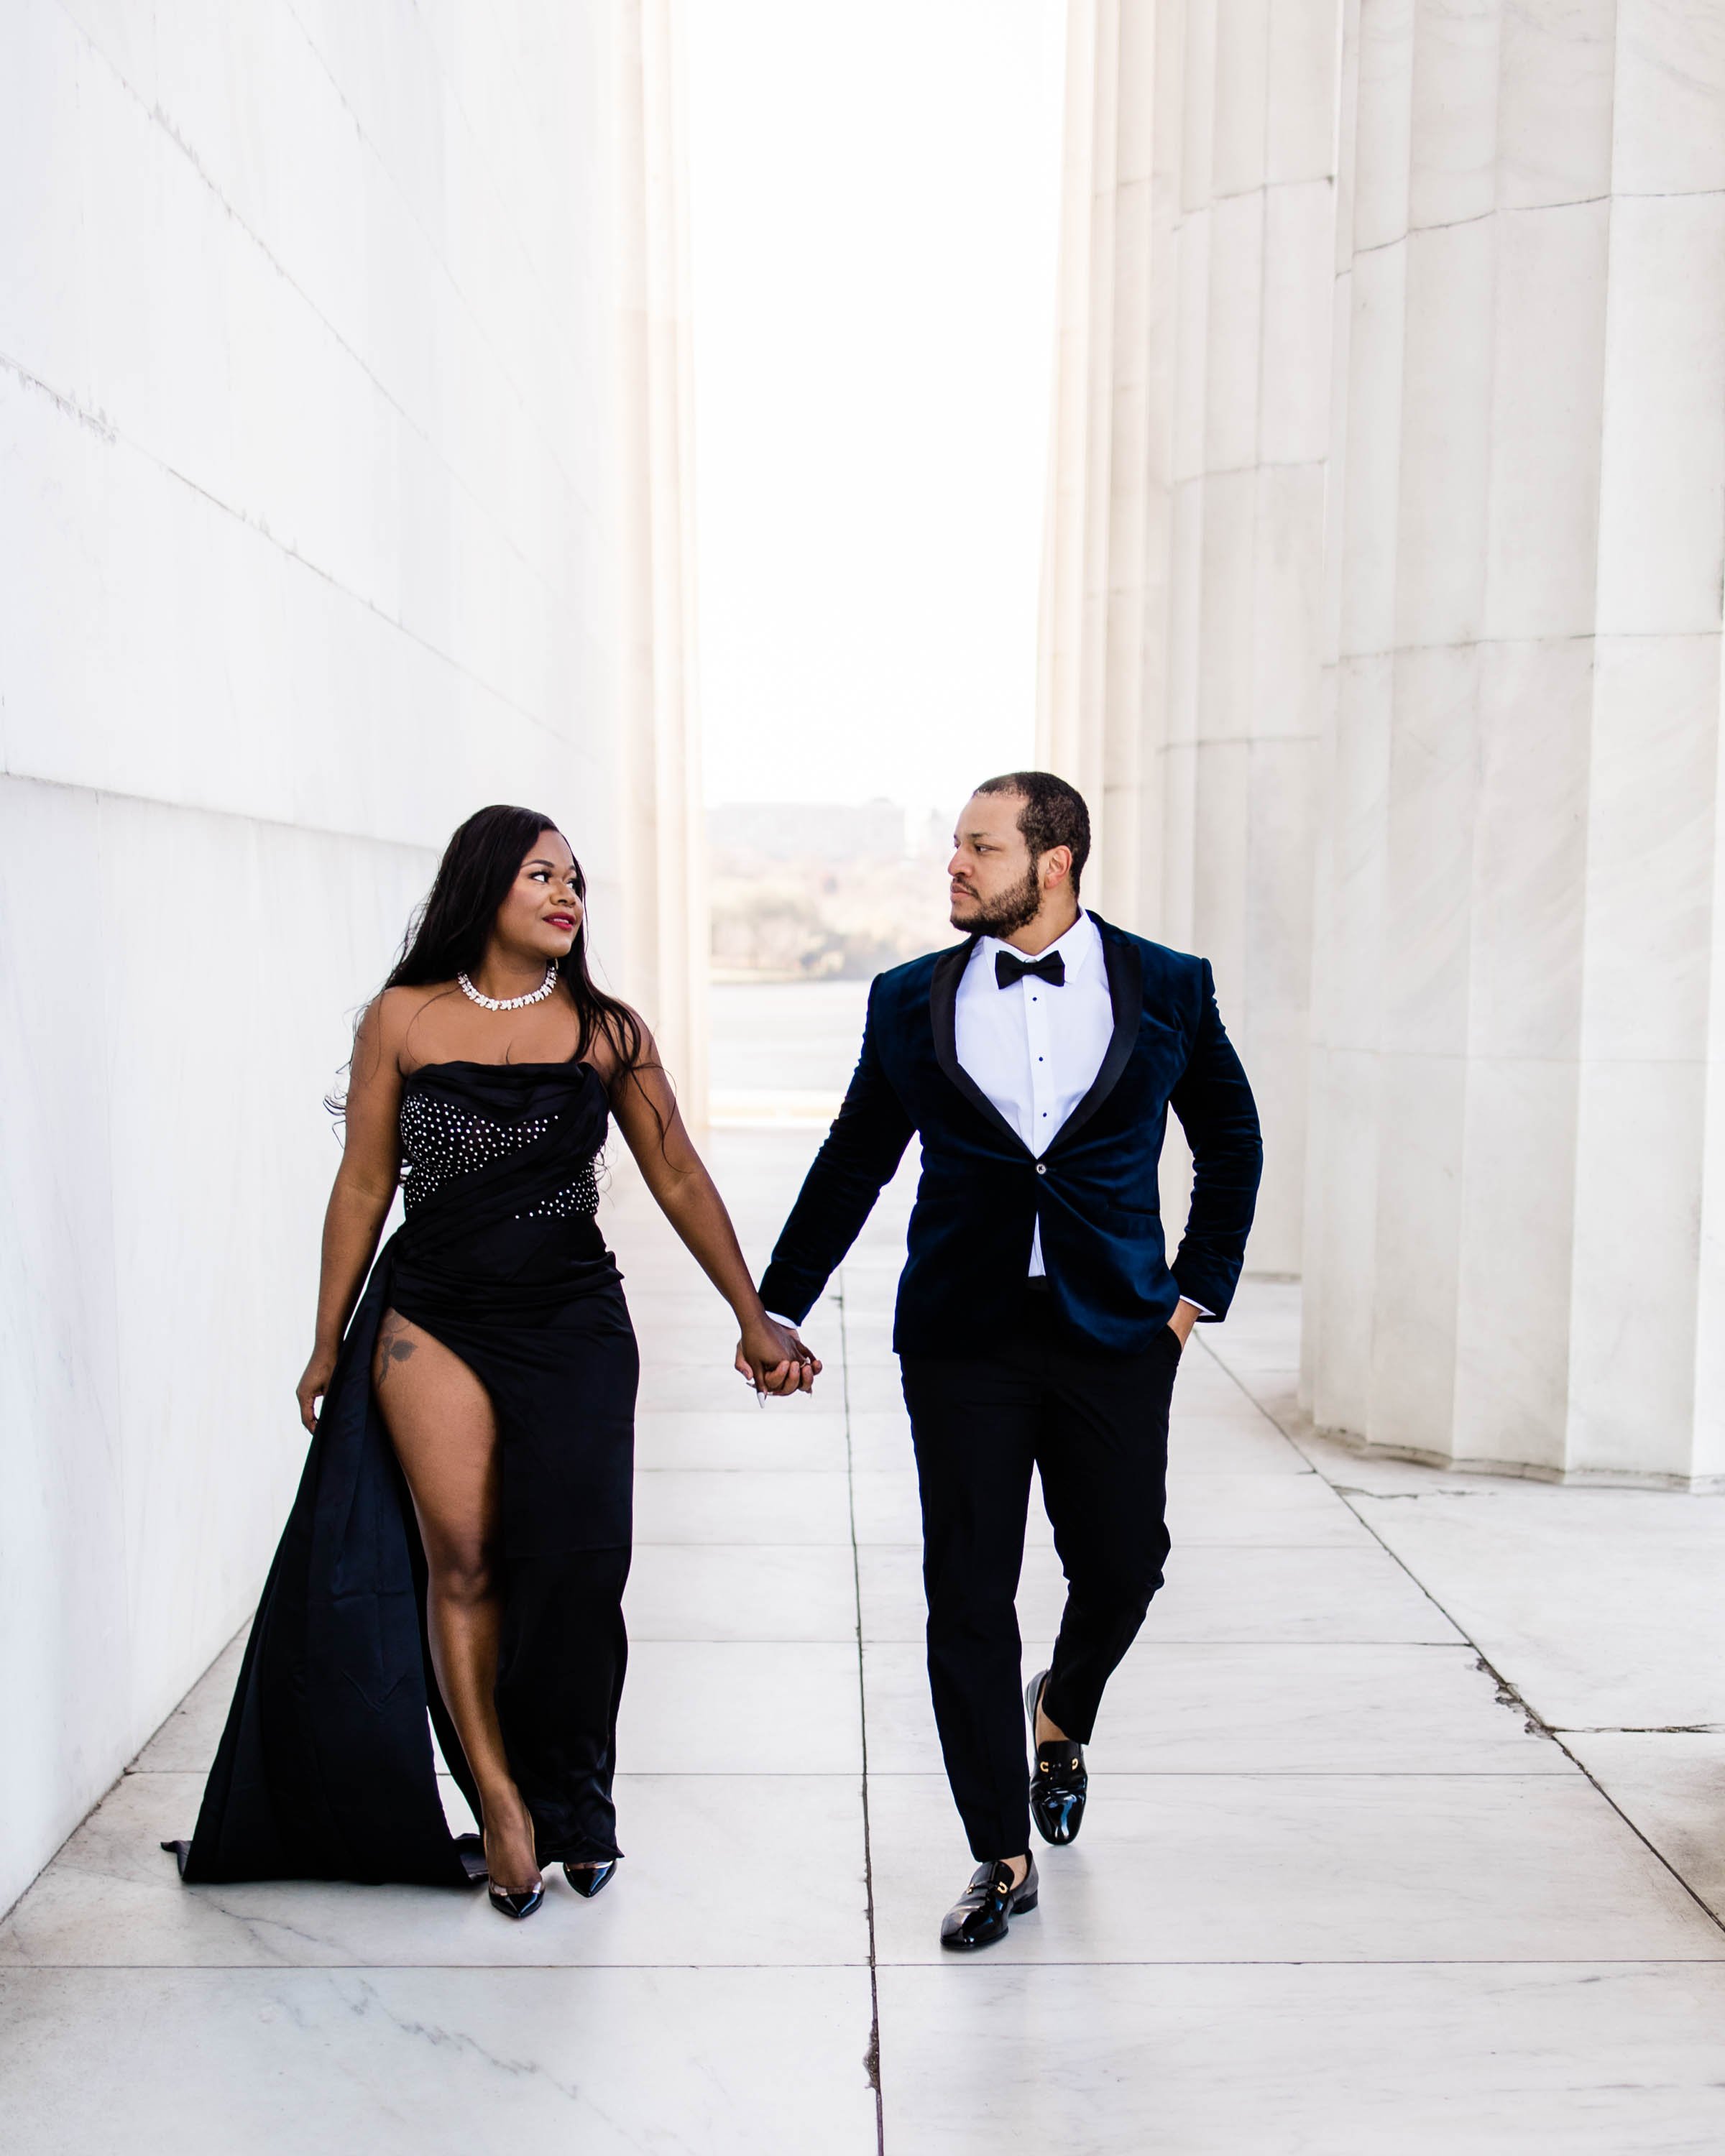 Top DC Engagement Session with Black Orchid Events Couple shot by Megapixels Media at the Lincoln Memorial-8.jpg